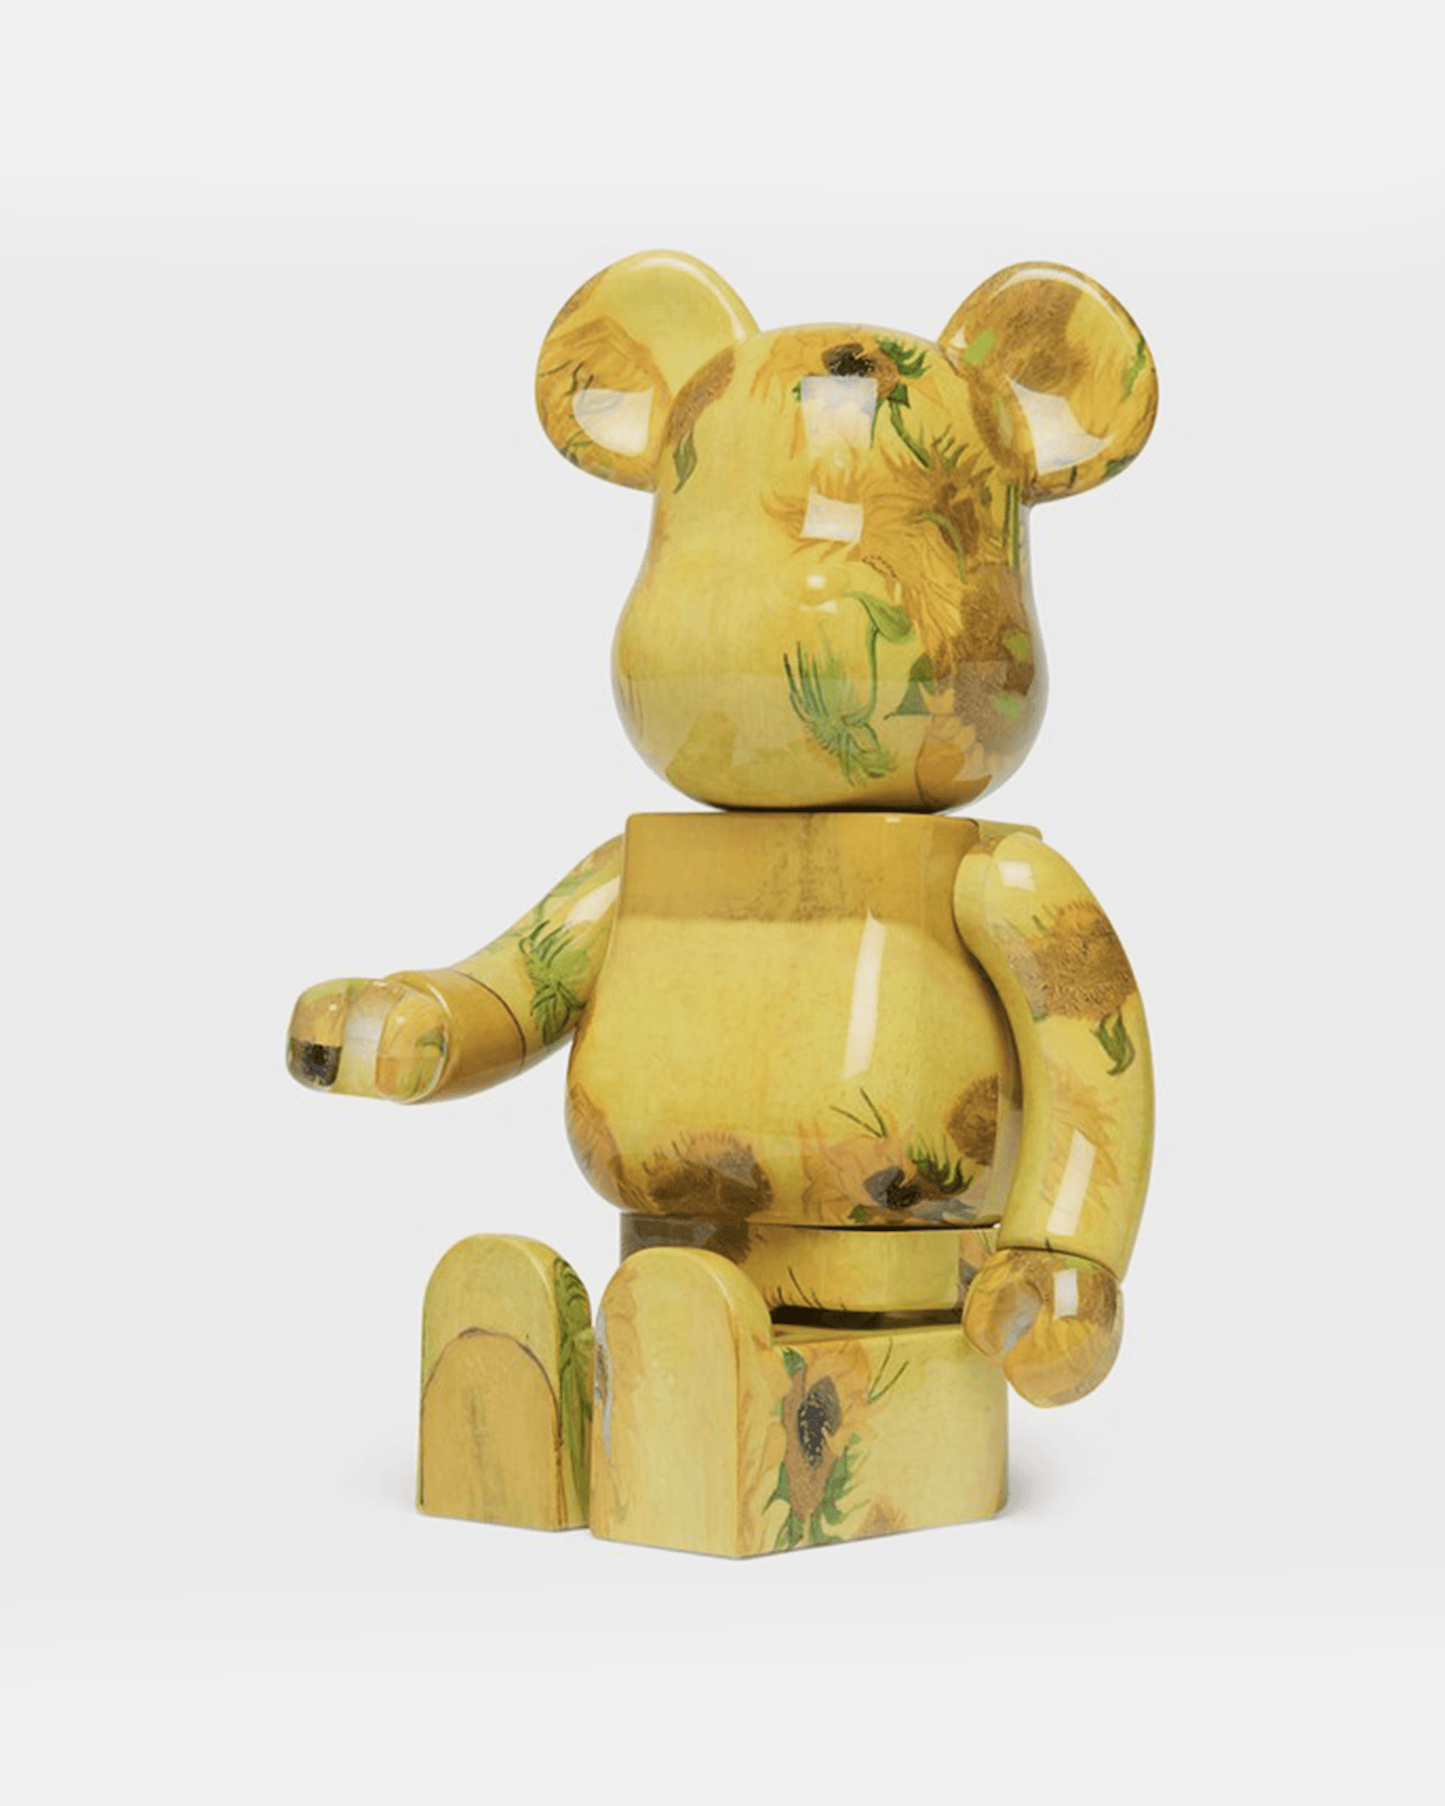 Medicom Lifestyle Home Be@rbrick 400% and 100% "Sunflowers" by Van Gogh